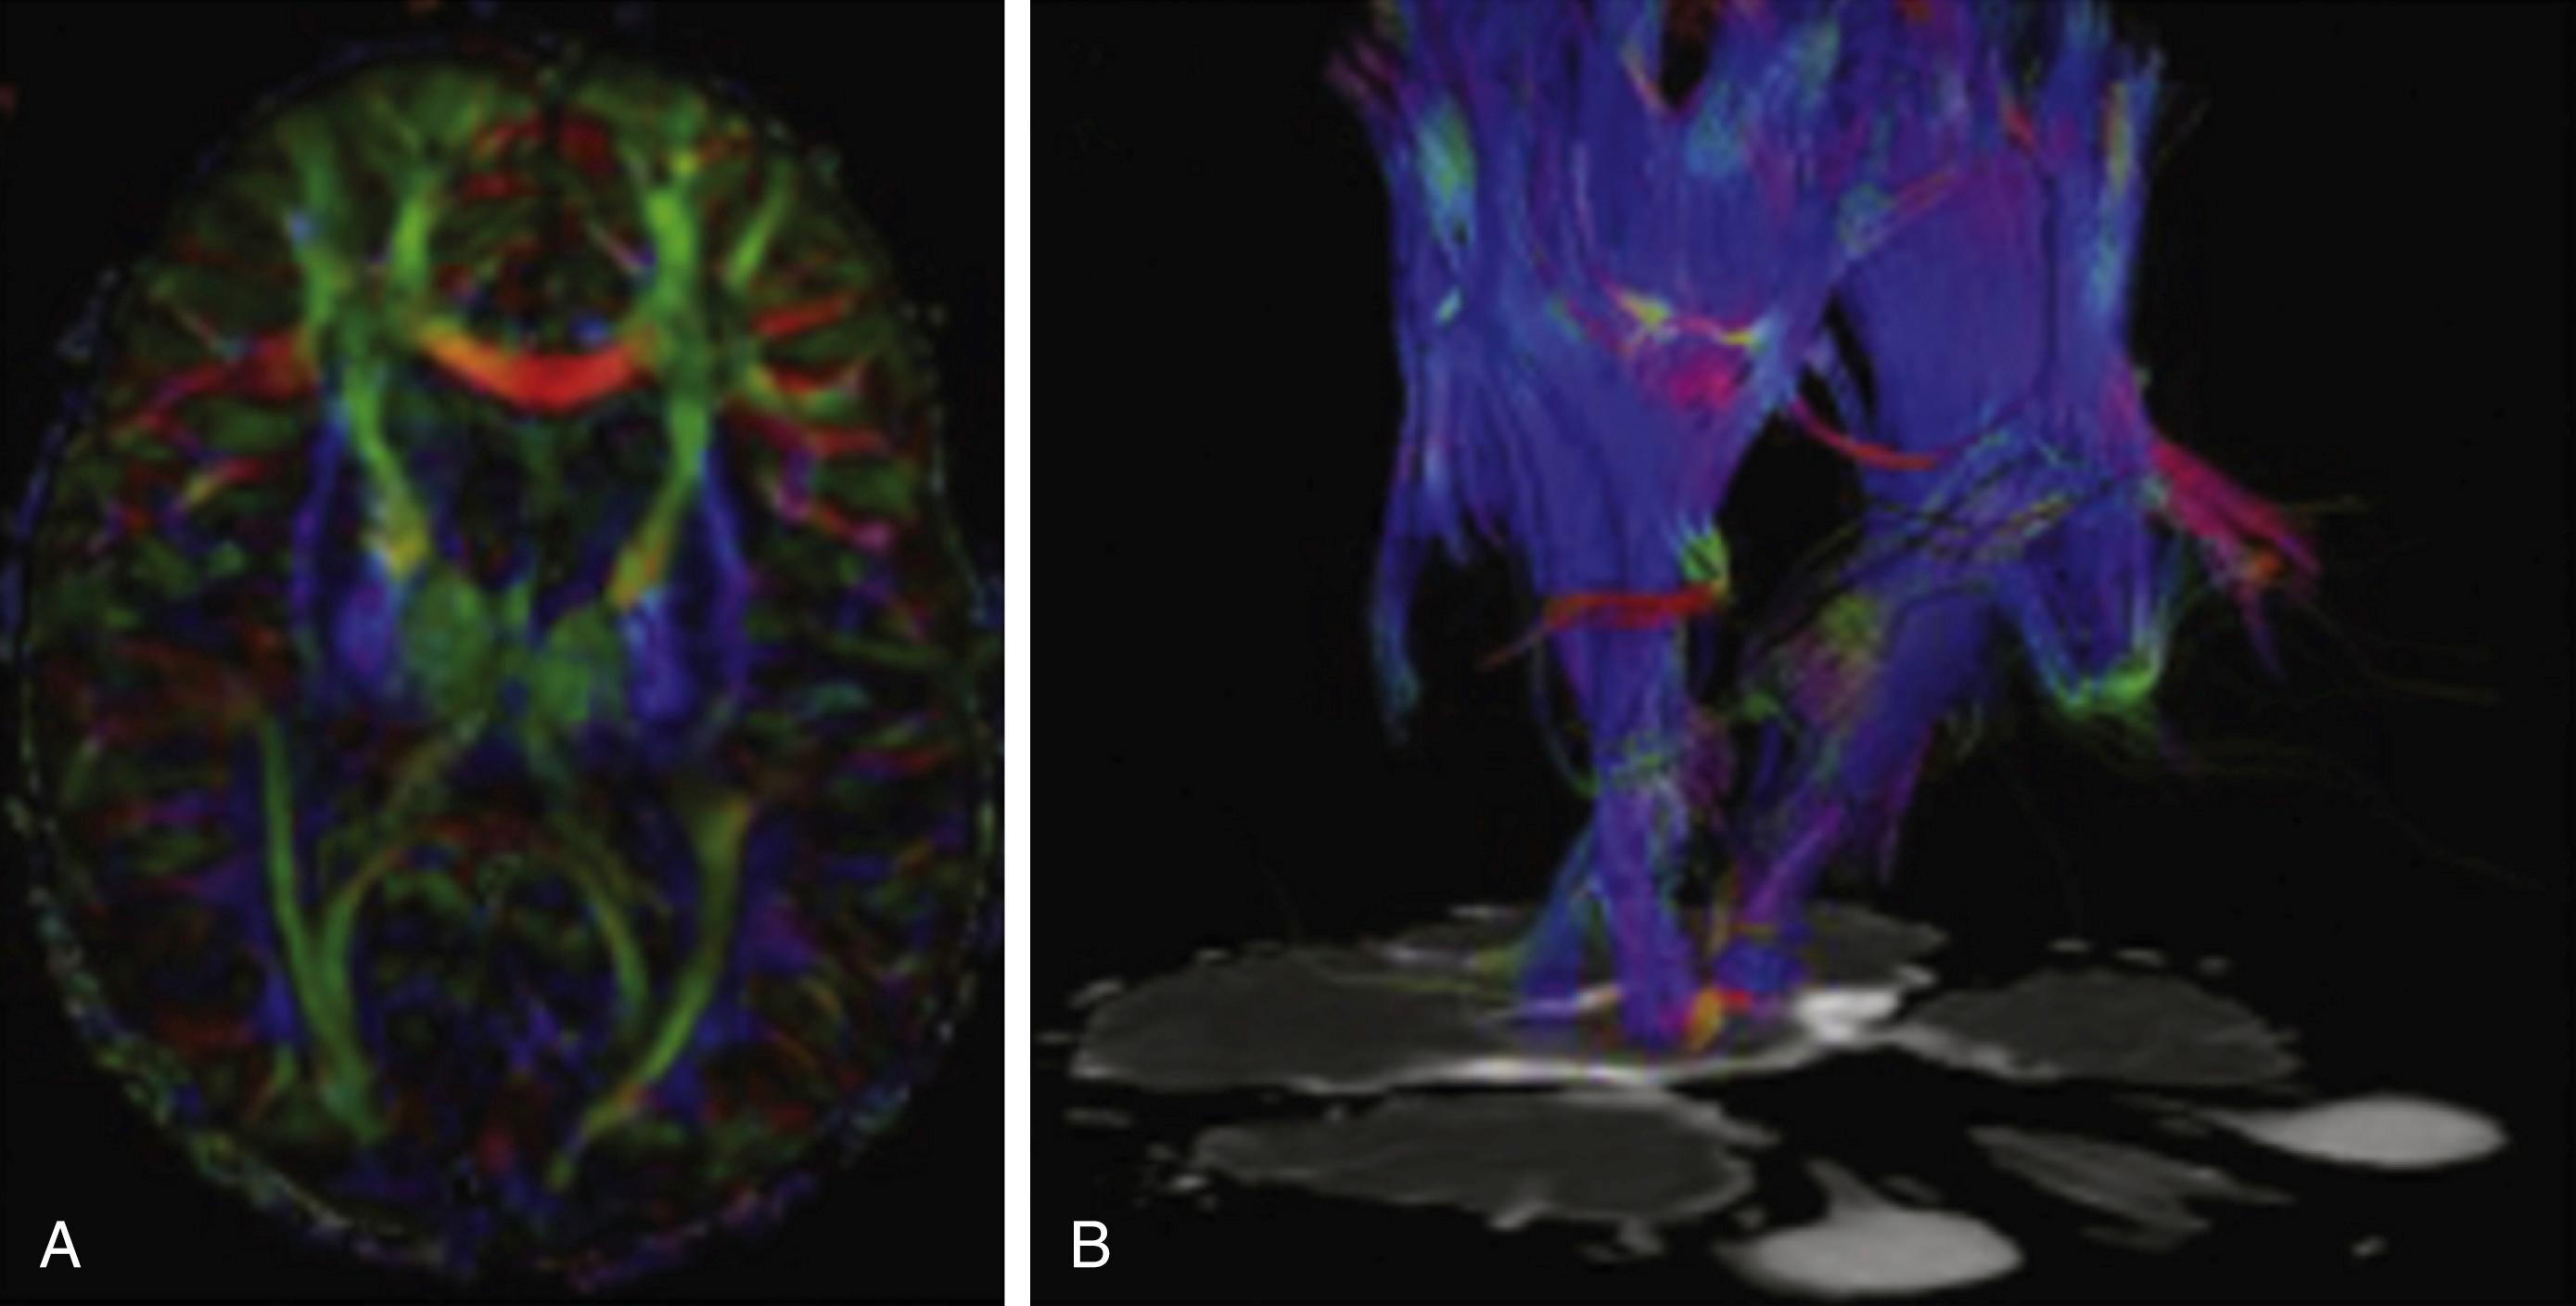 FIGURE 3.2, Output of fiber-tracking algorithms can be viewed on (A) two-dimensional (2D) magnetic resonance imaging (MRI) slice projections or (B) as a three-dimensional (3D) map, which can be integrated into intraoperative neuronavigation systems. In the 2D projection (A), there is a color convention whereby red represents fibers in the x-axis (left-right), green represents fibers in the y-axis (anterior-posterior) and blue represents fibers in the z-axis (cranial-caudal).